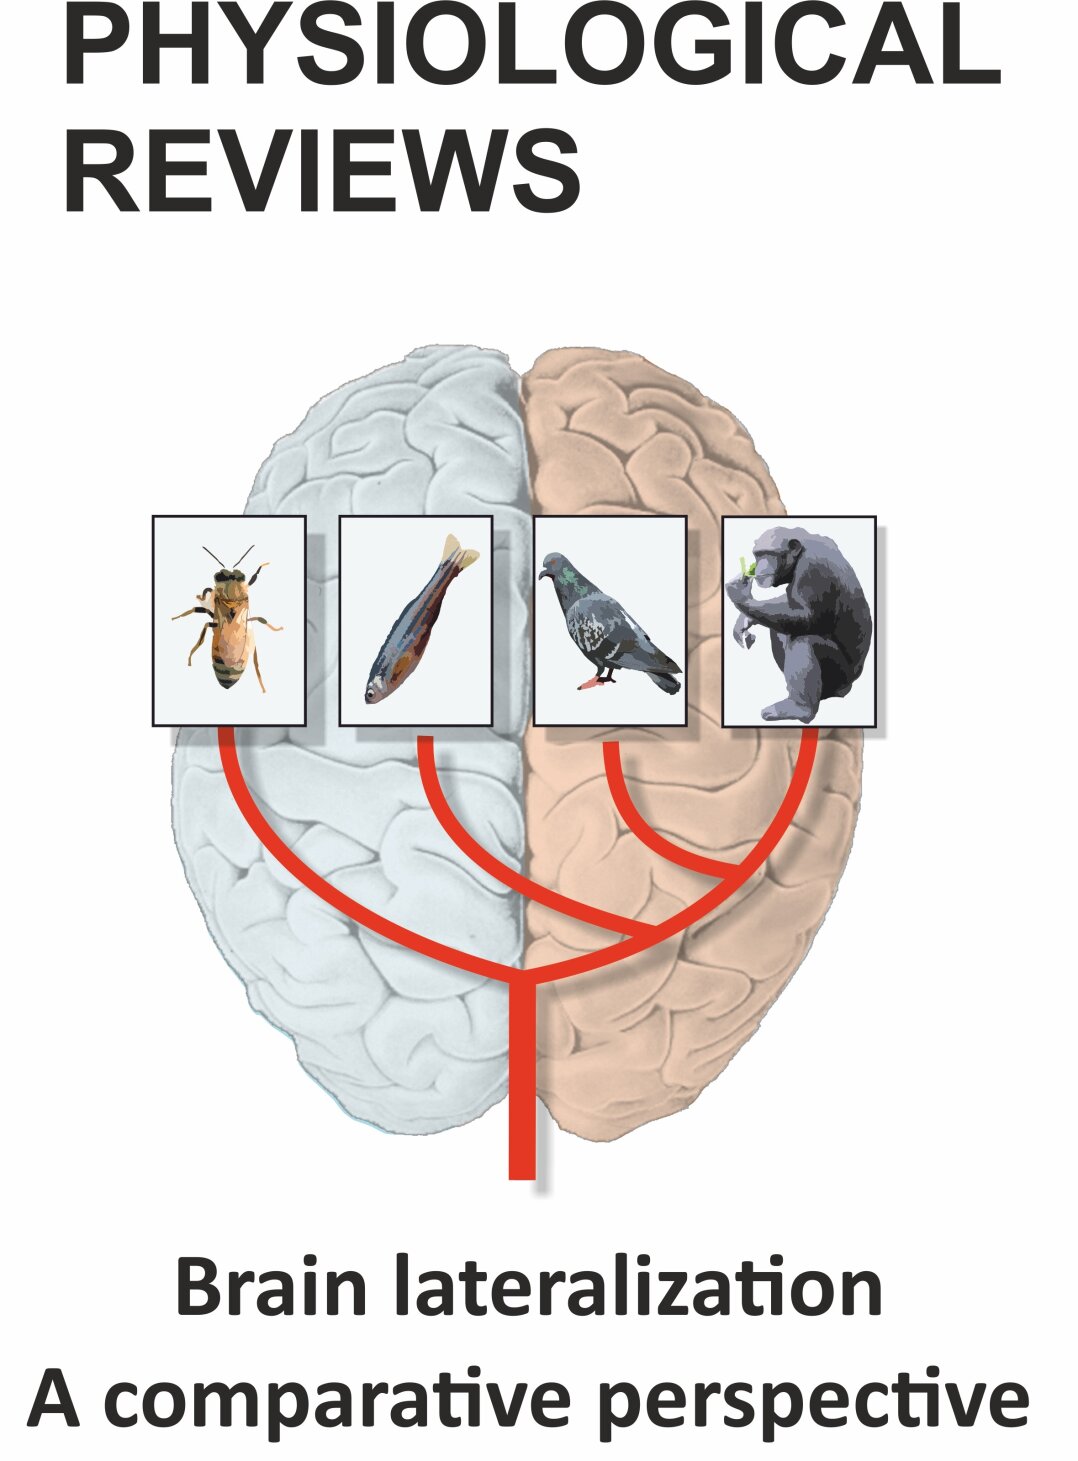 Brain lateralization: The comparative perspective